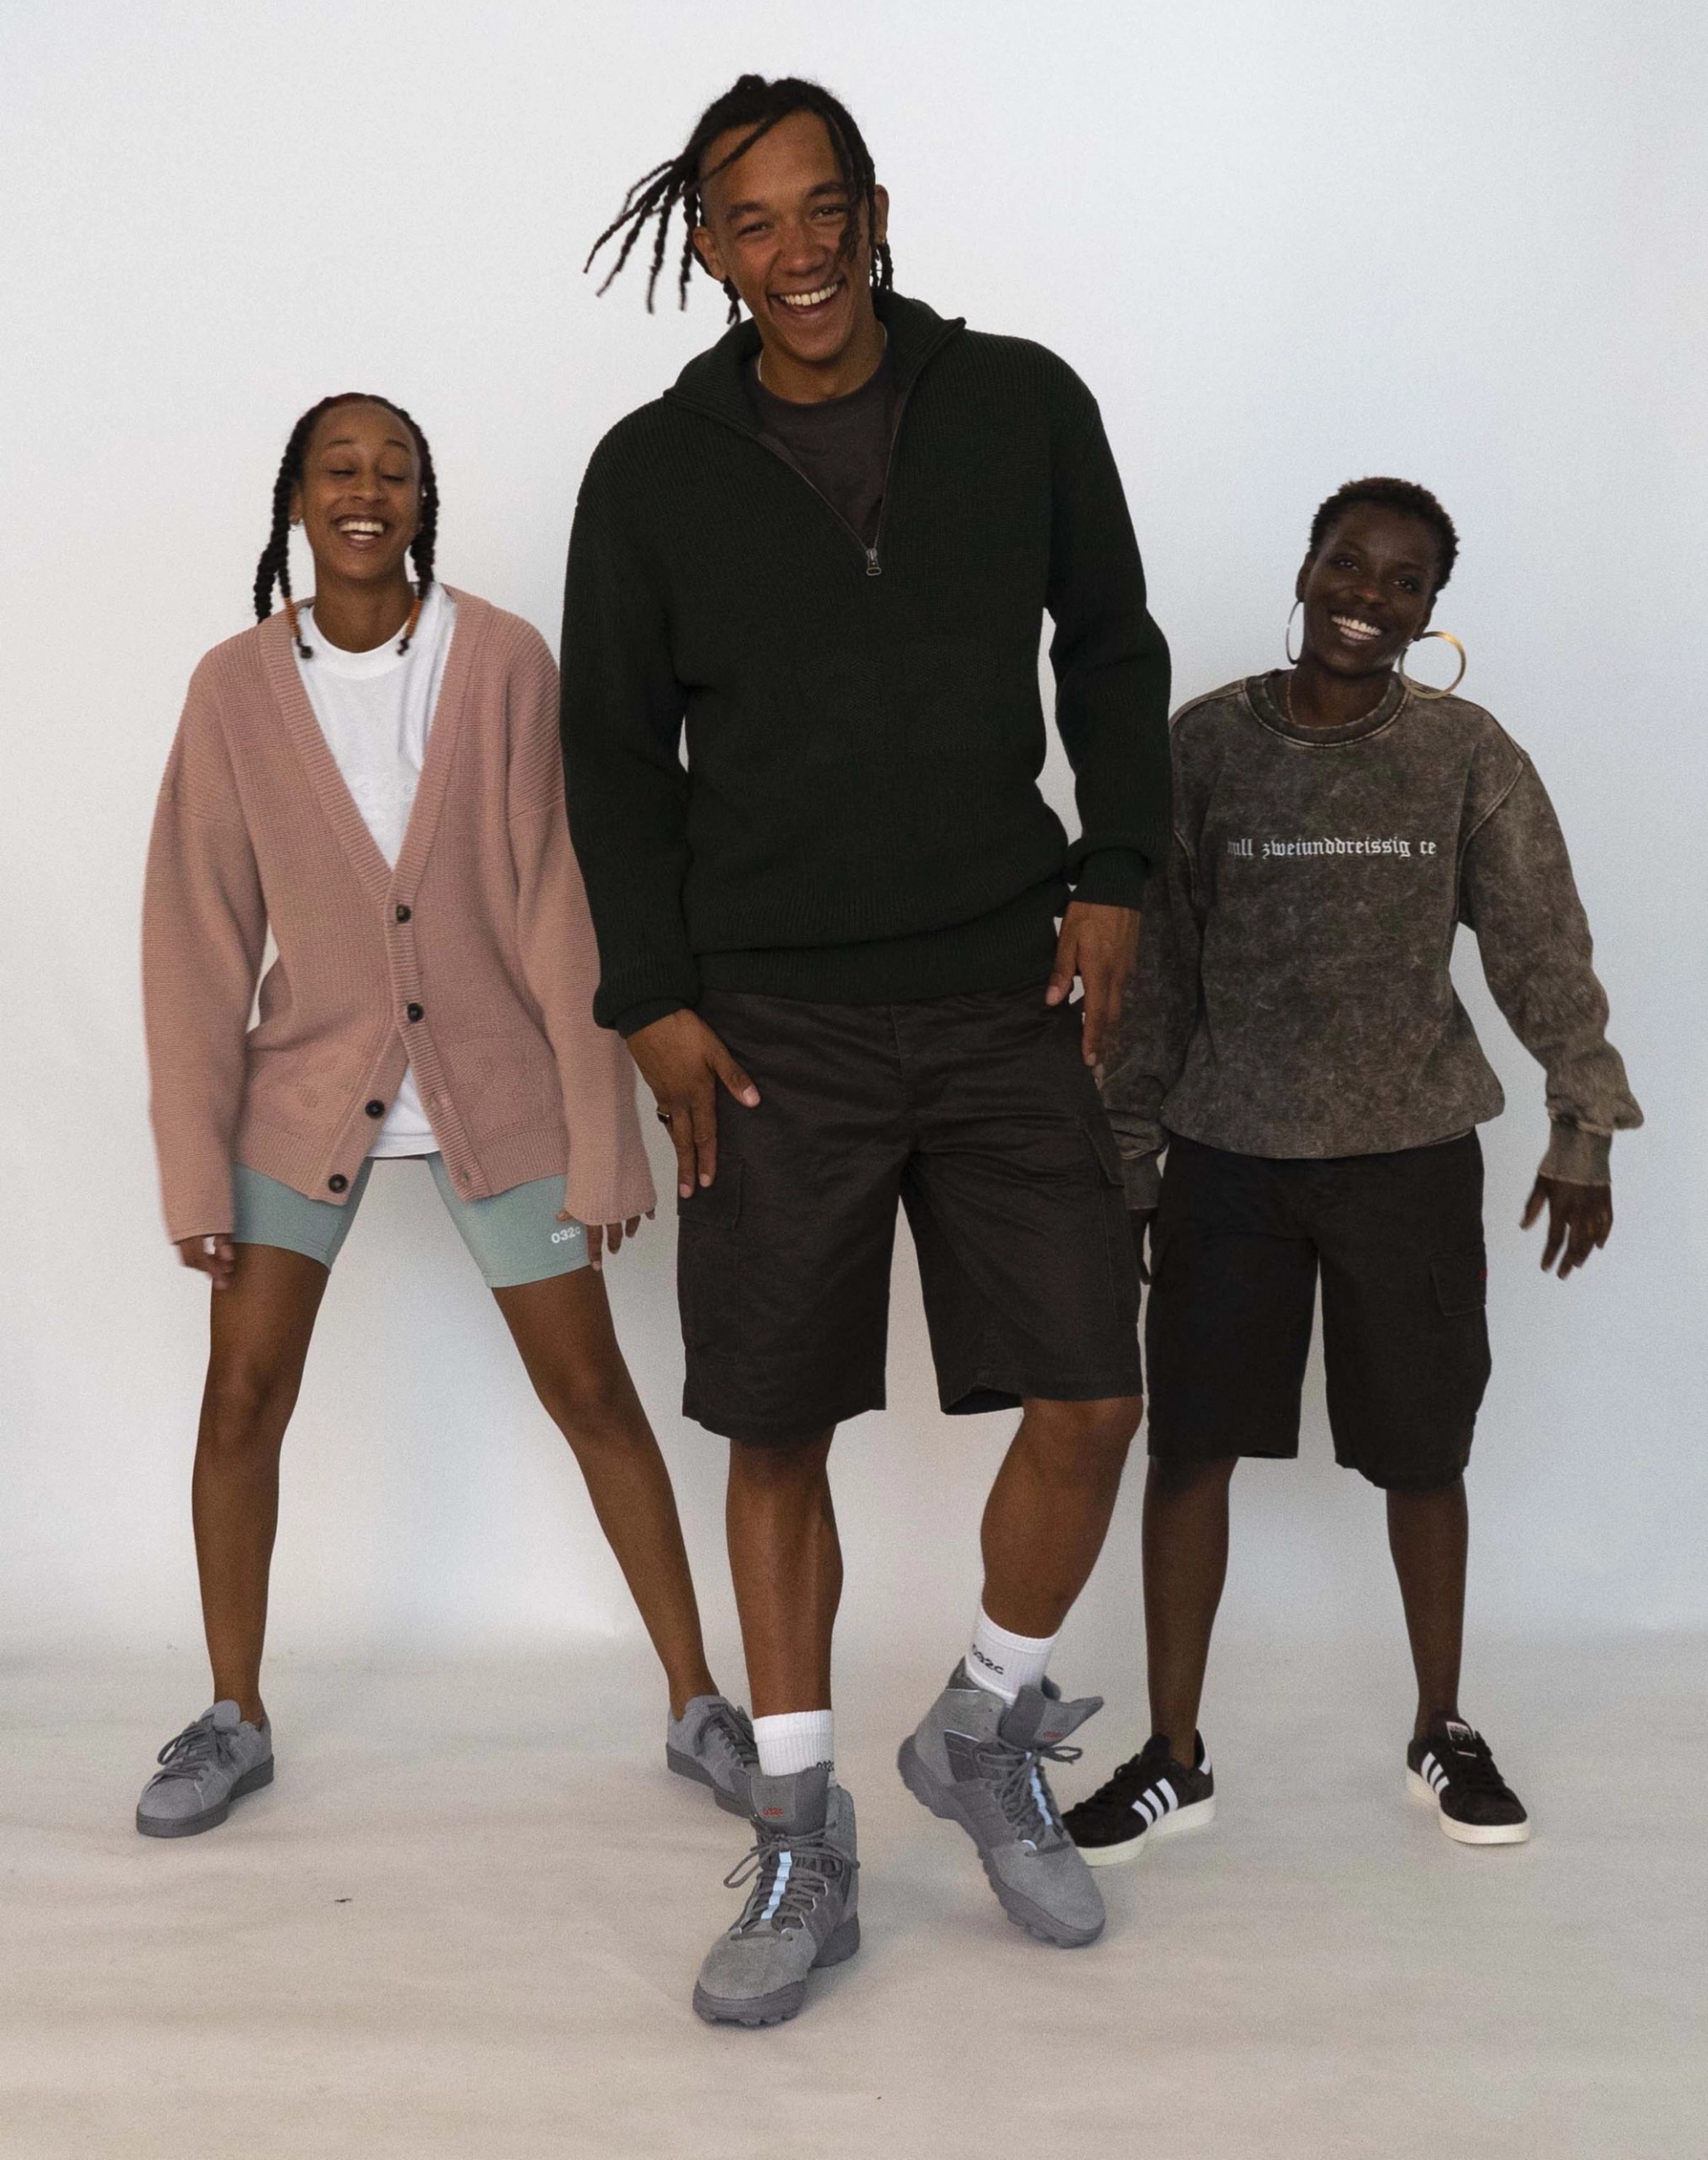 Libell, Buyegi and Mariama dazzle with bright smiles! Libell wears the 032c LoveSexDreams Knit Cardigan, and longsleeve t-shirt in white with neoprene shorts in mint. Buyegi wears the Knit Troyer in olive and Cargo Shorts, with the 032c x adidas Originals GSG-9High Top Sneaker. Mariama wears the "null zweiunddreißig ce" crewneck in acid wash brown with Cargo Shorts.